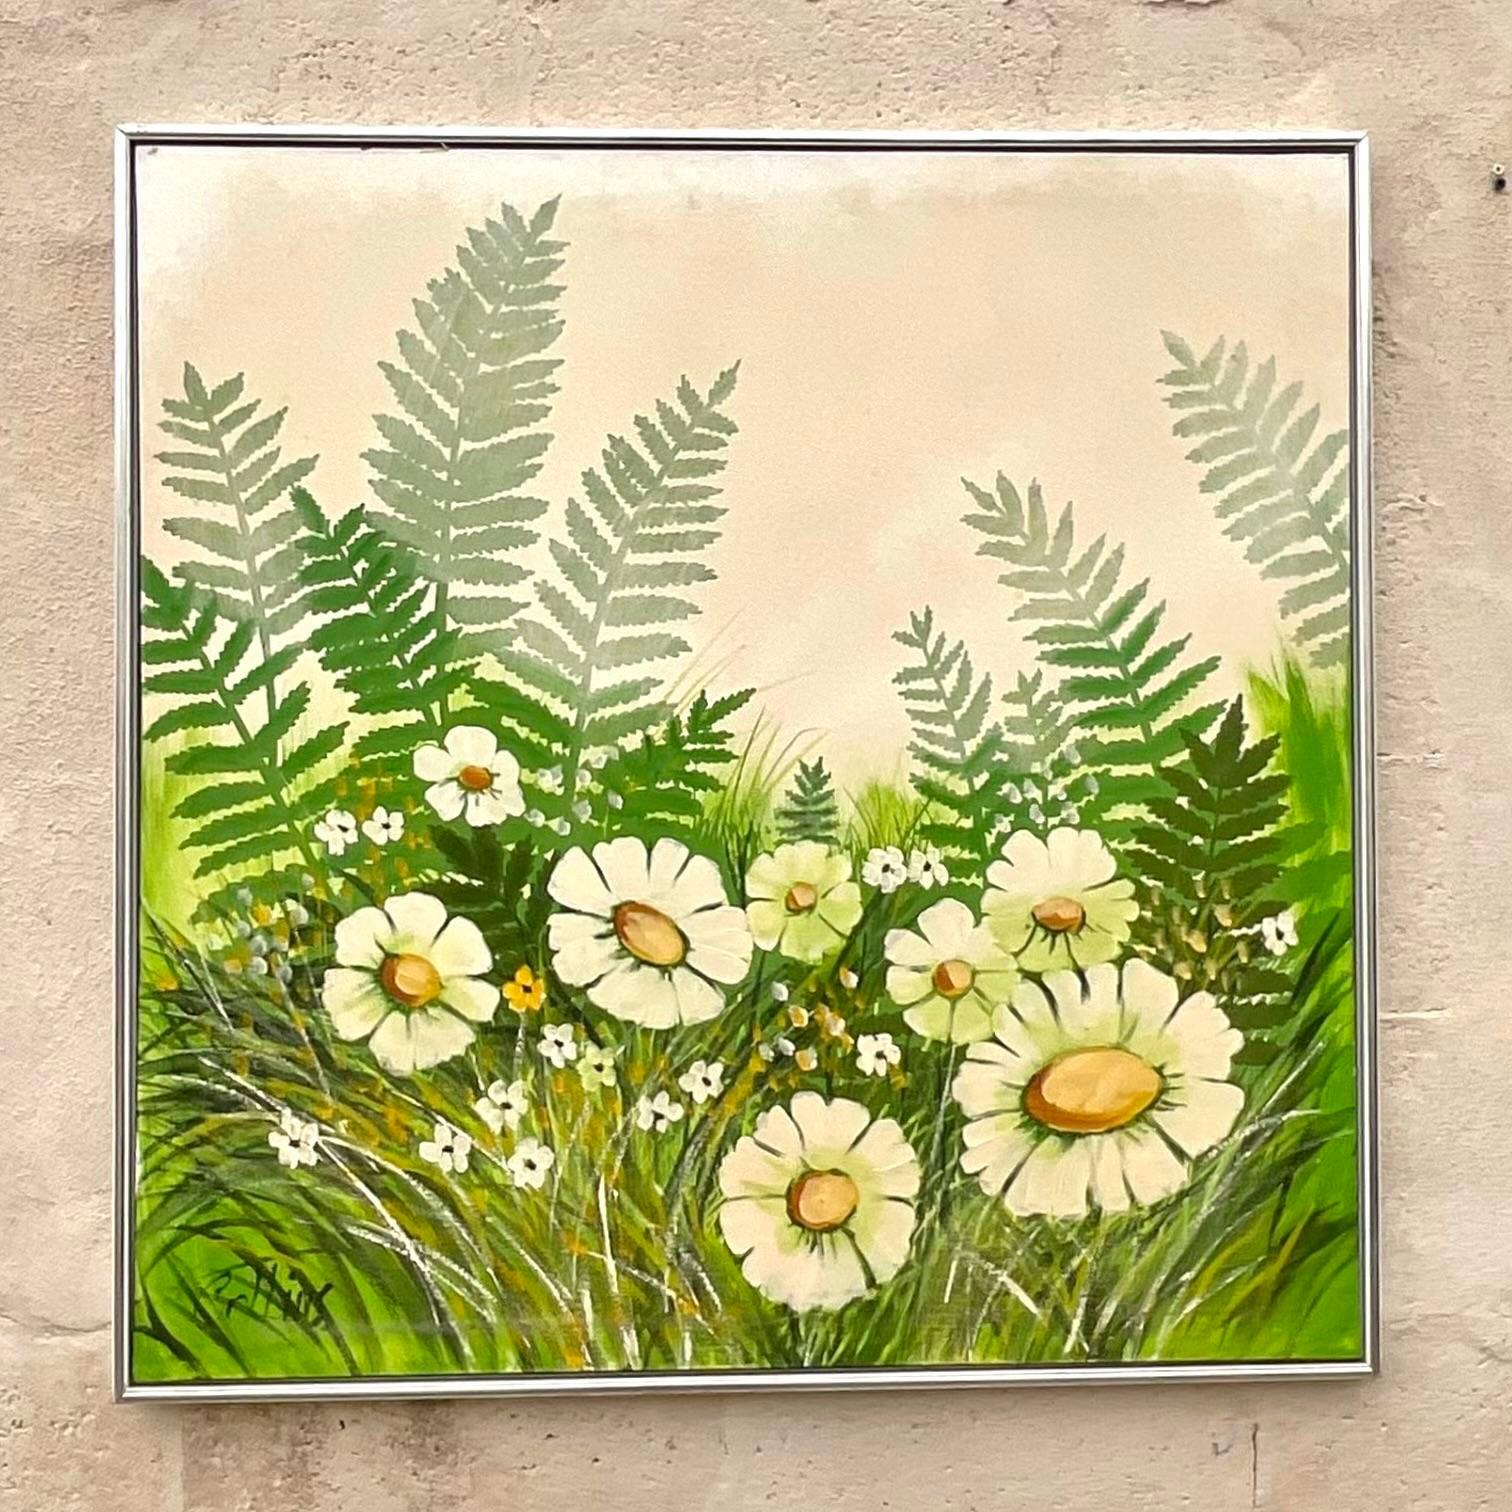 A lovely vintage painting of daisies in a field. The paining is rich in the color green to contrast the paleness of the white flowers. It is signed on the left side by the artist. Acquired at a Palm Beach estate. less